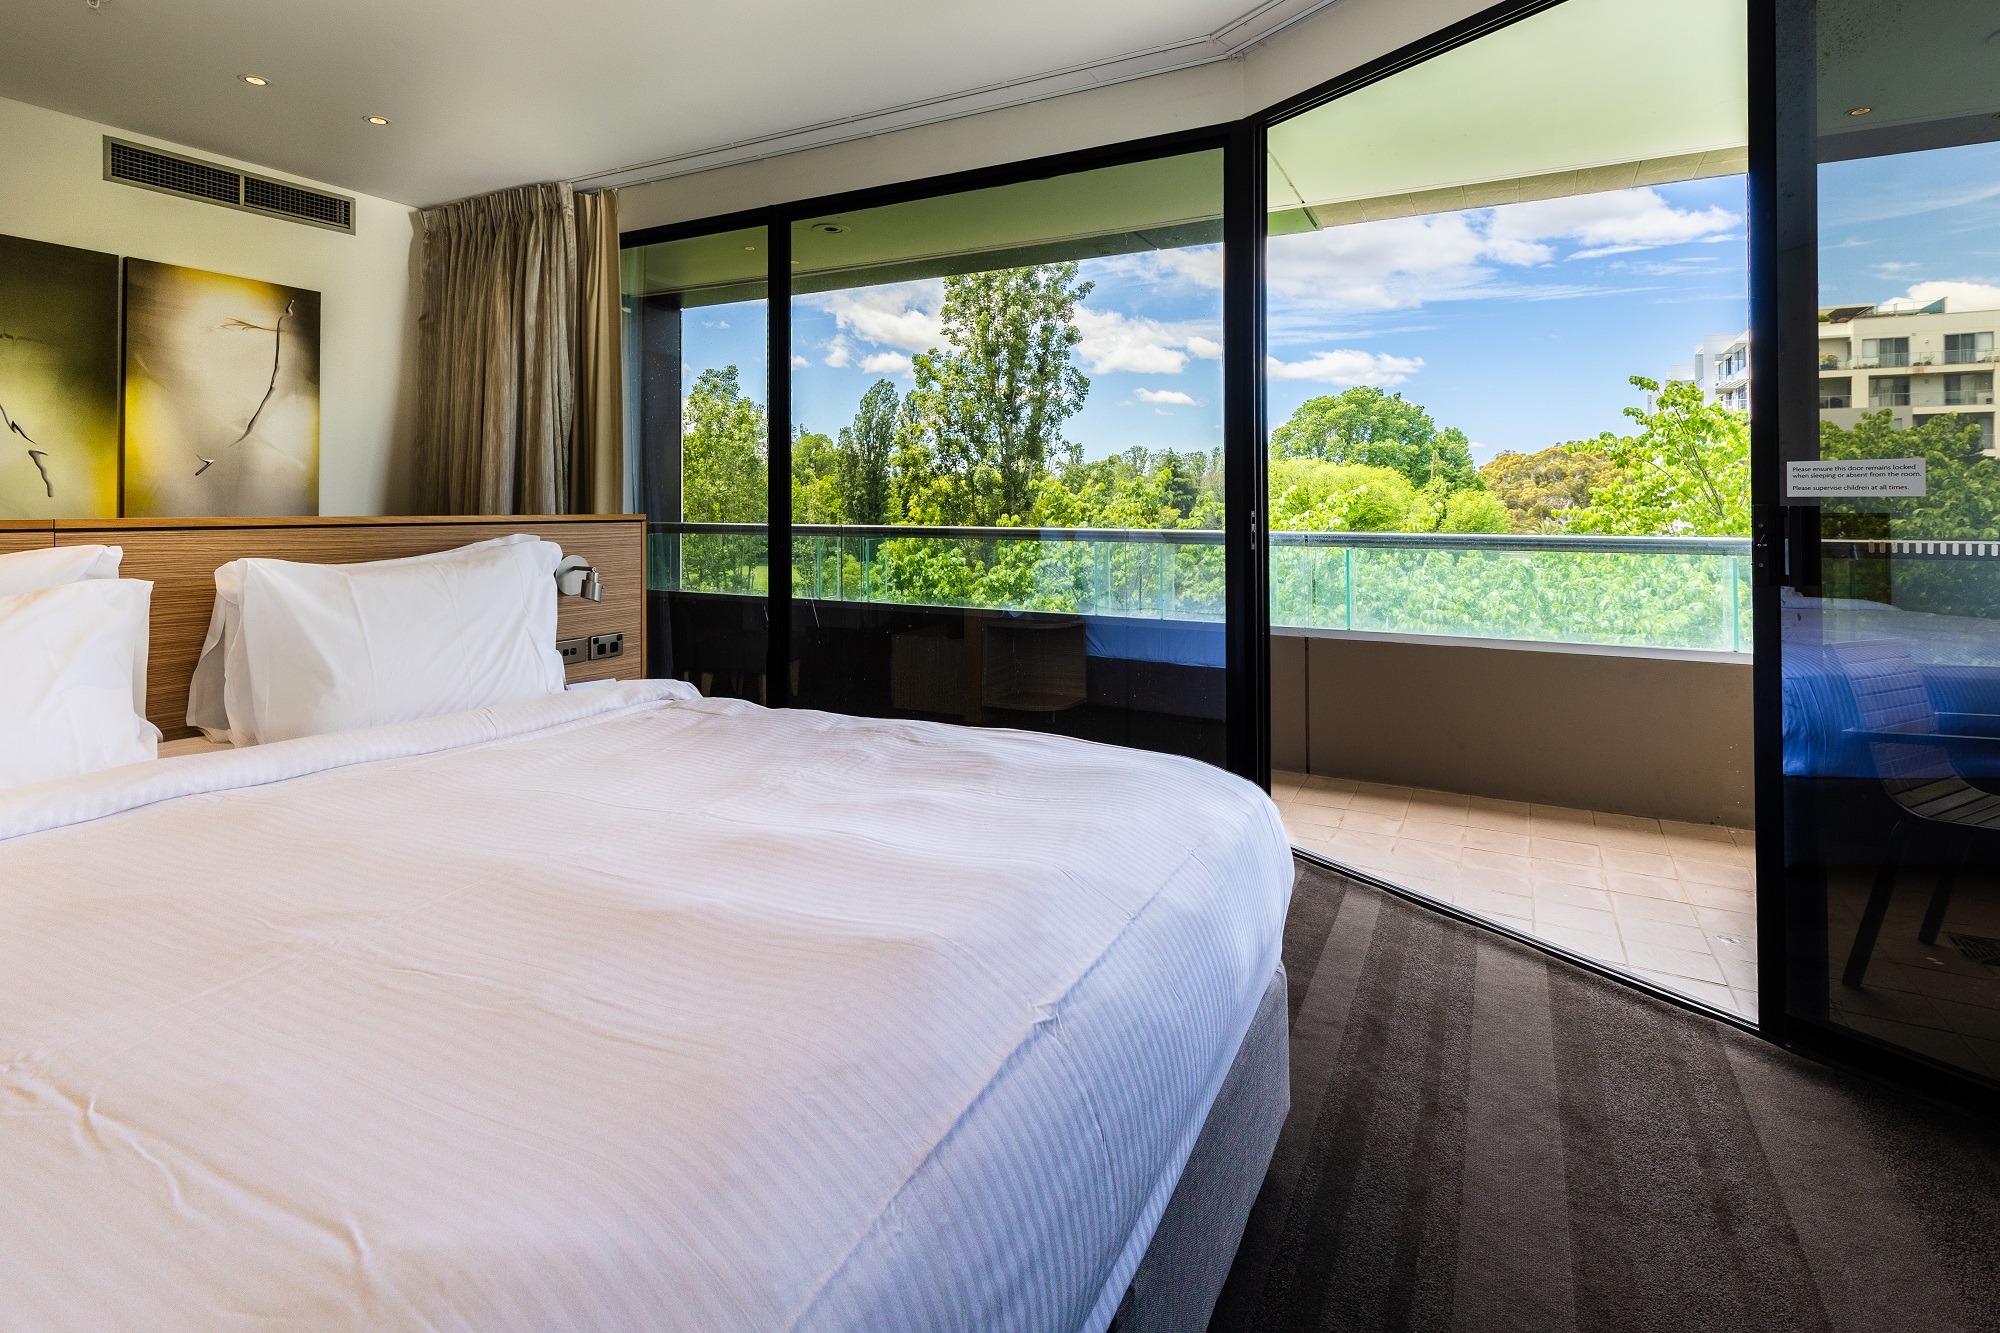 Deluxe Suite at Crowne Plaza Canberra